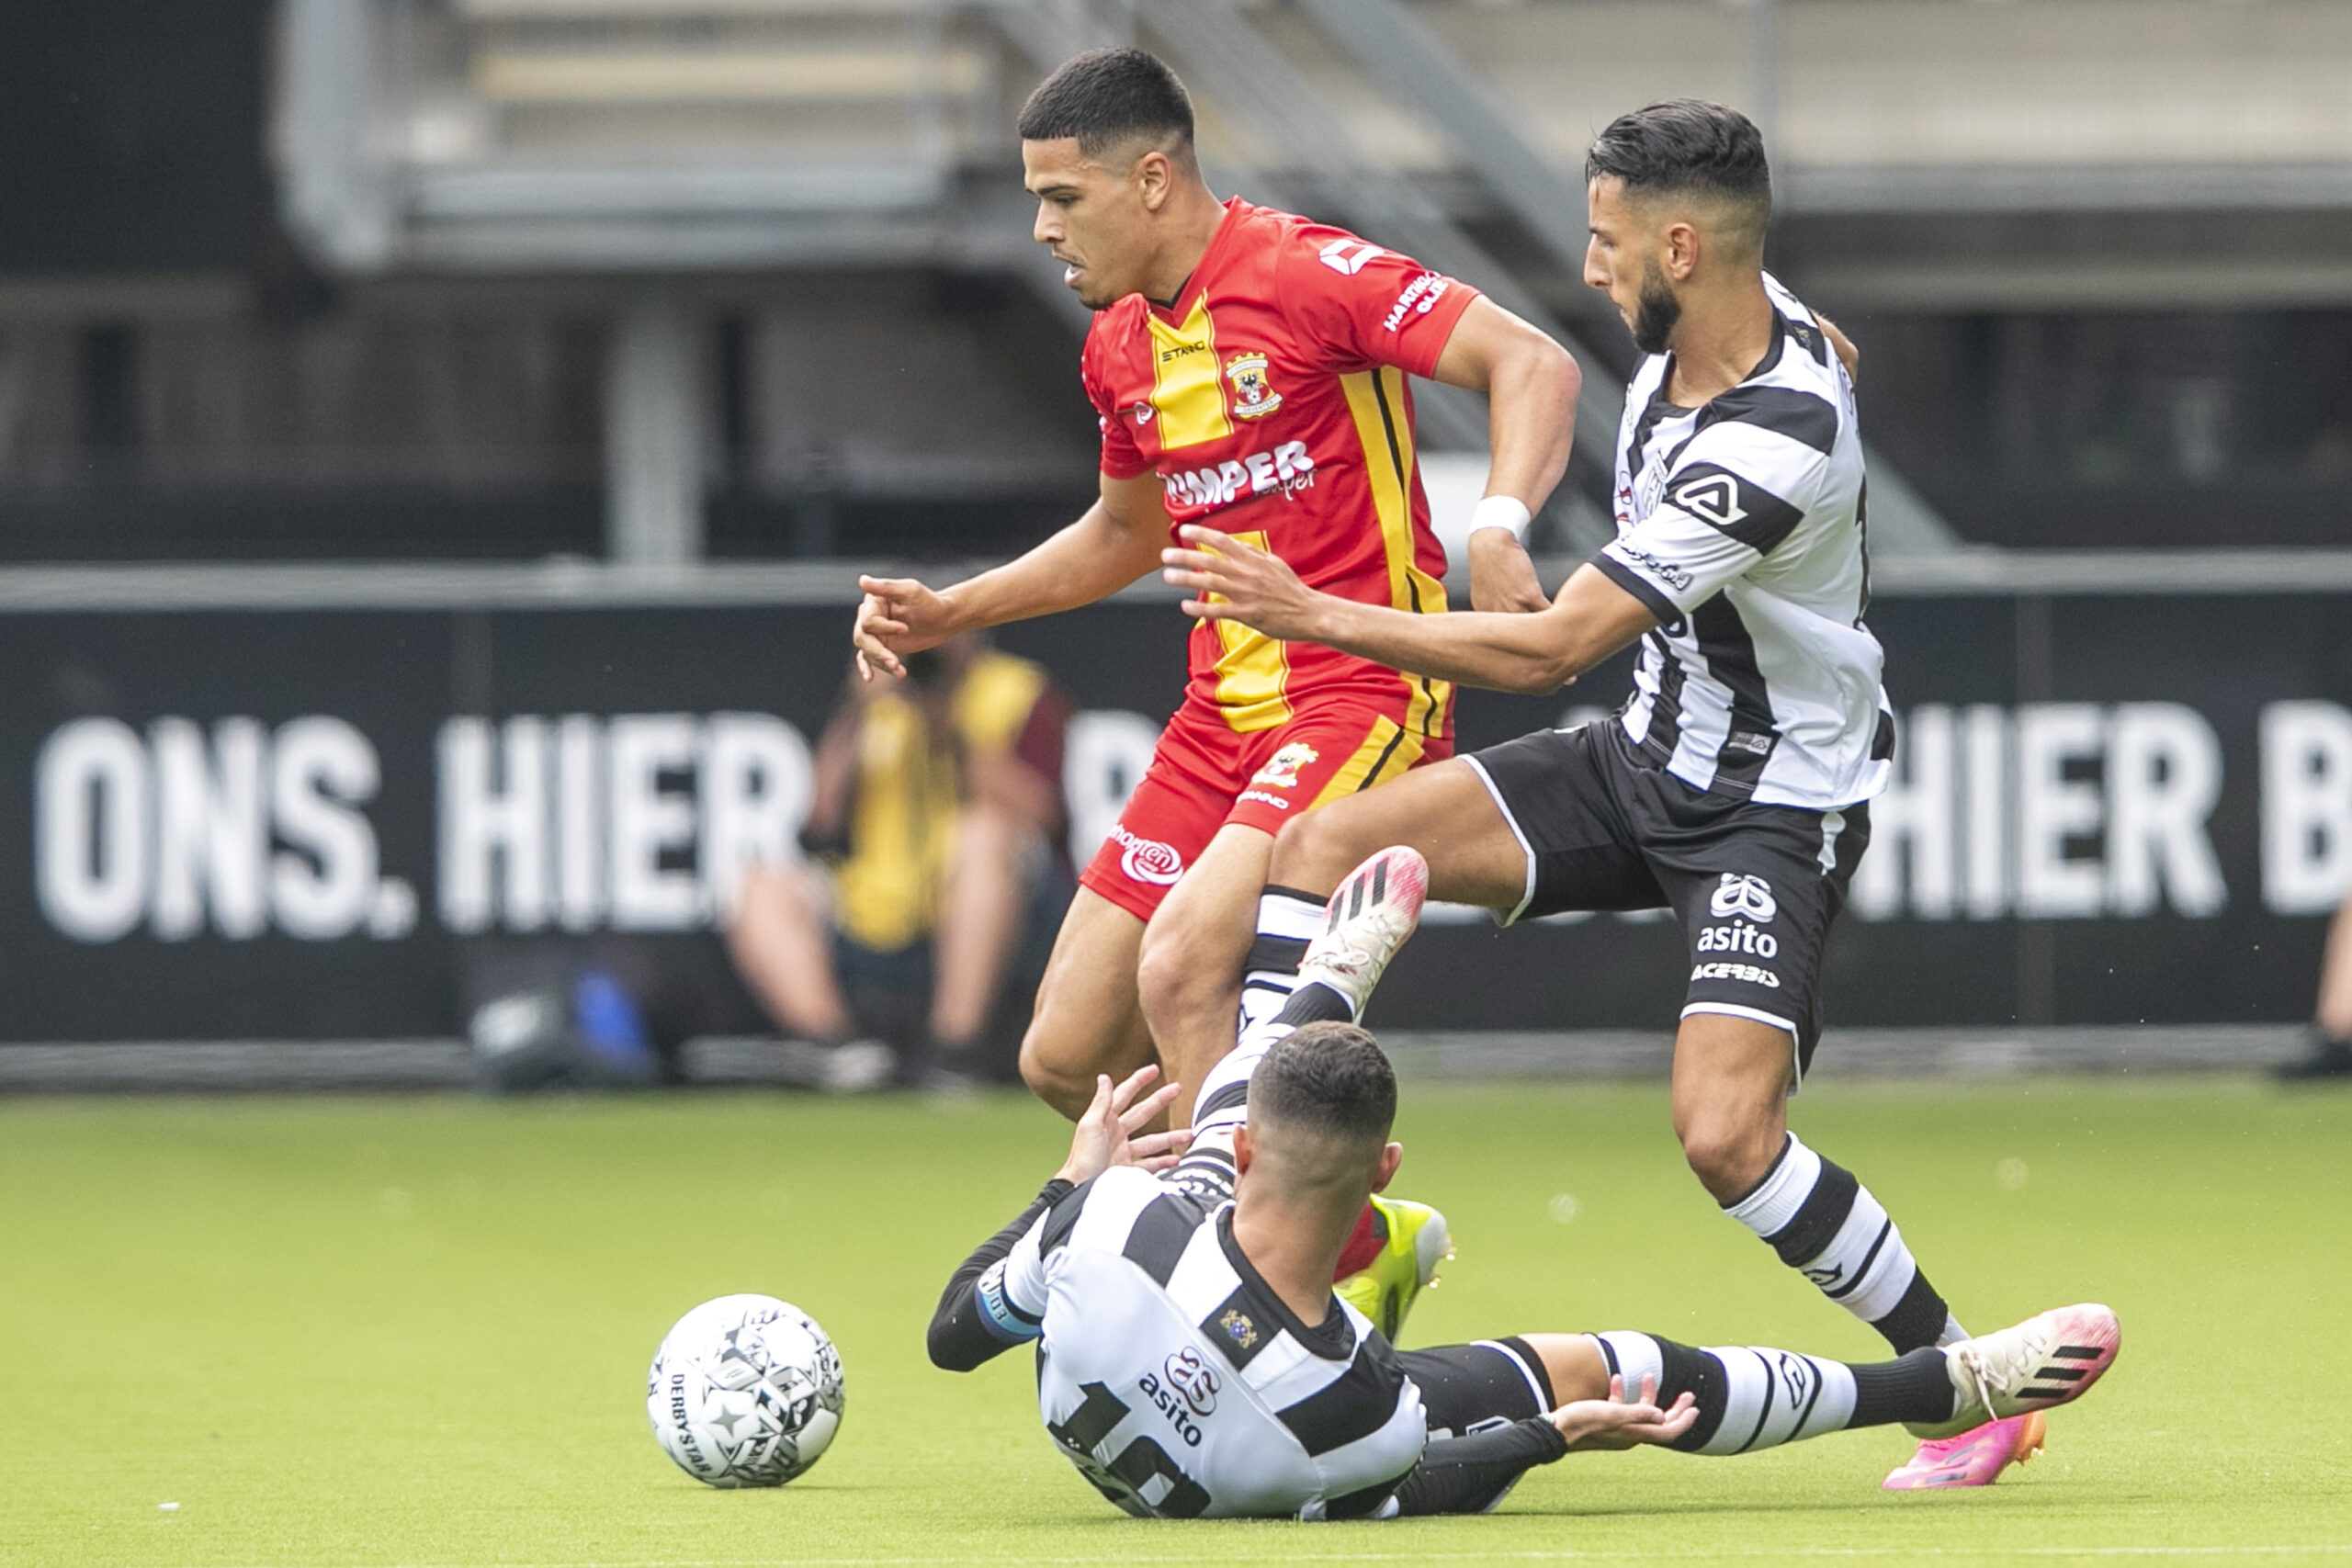 Netherlands: Heracles Almelo Vs Go Ahead Eagles